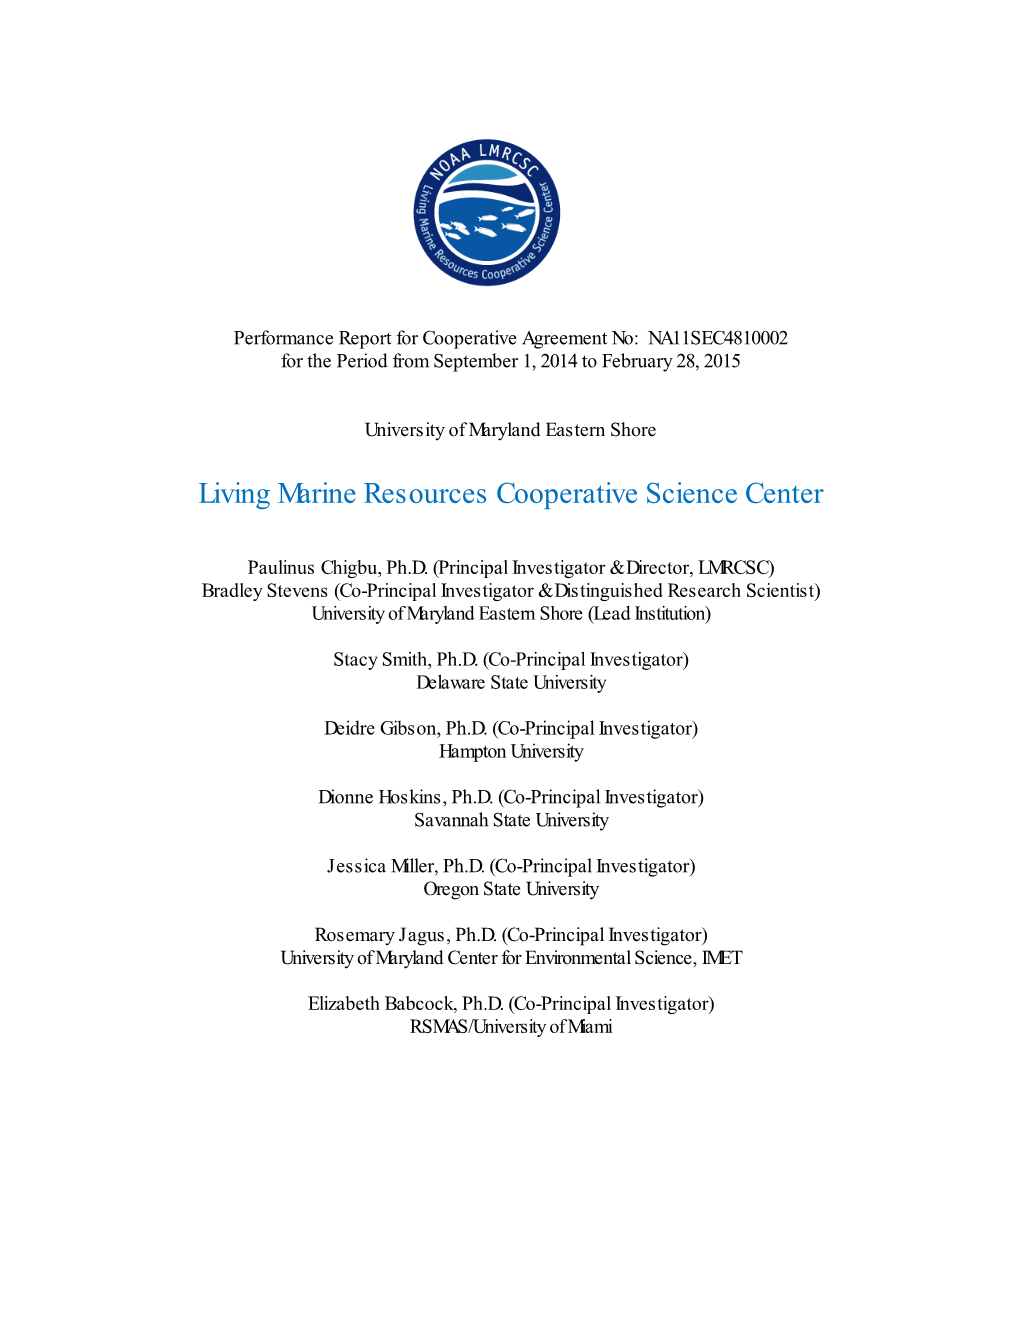 Living Marine Resources Cooperative Science Center